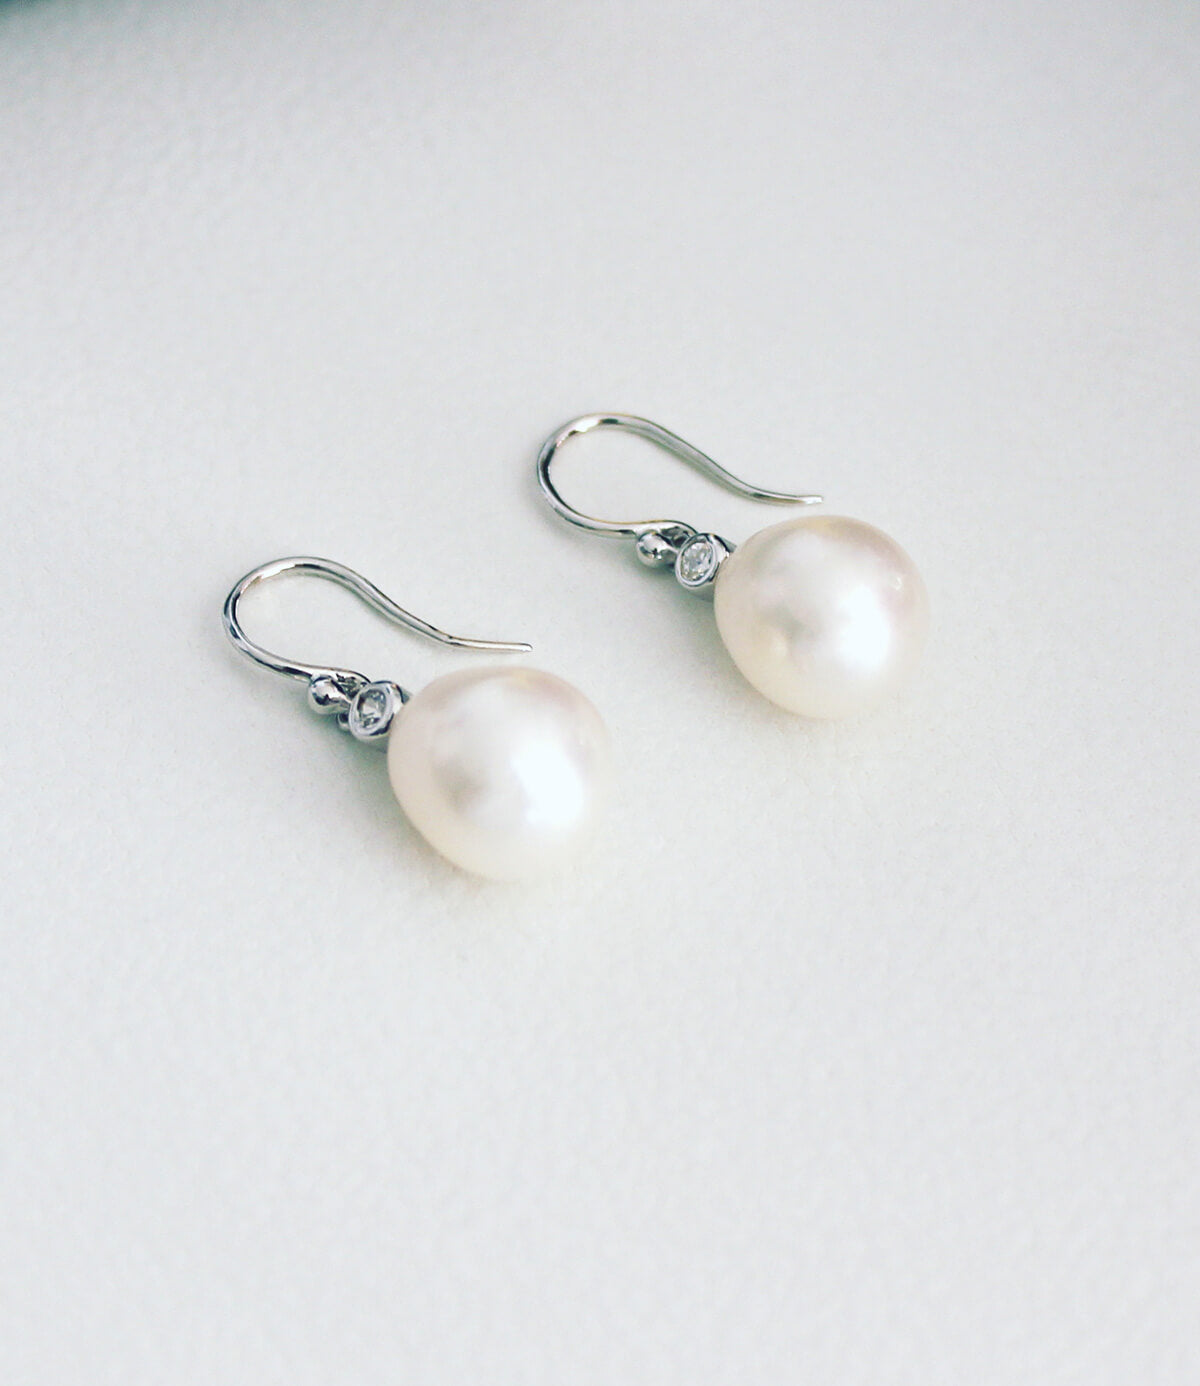 Petite Pearl Earrings-Gold Filled-Sterling Silver